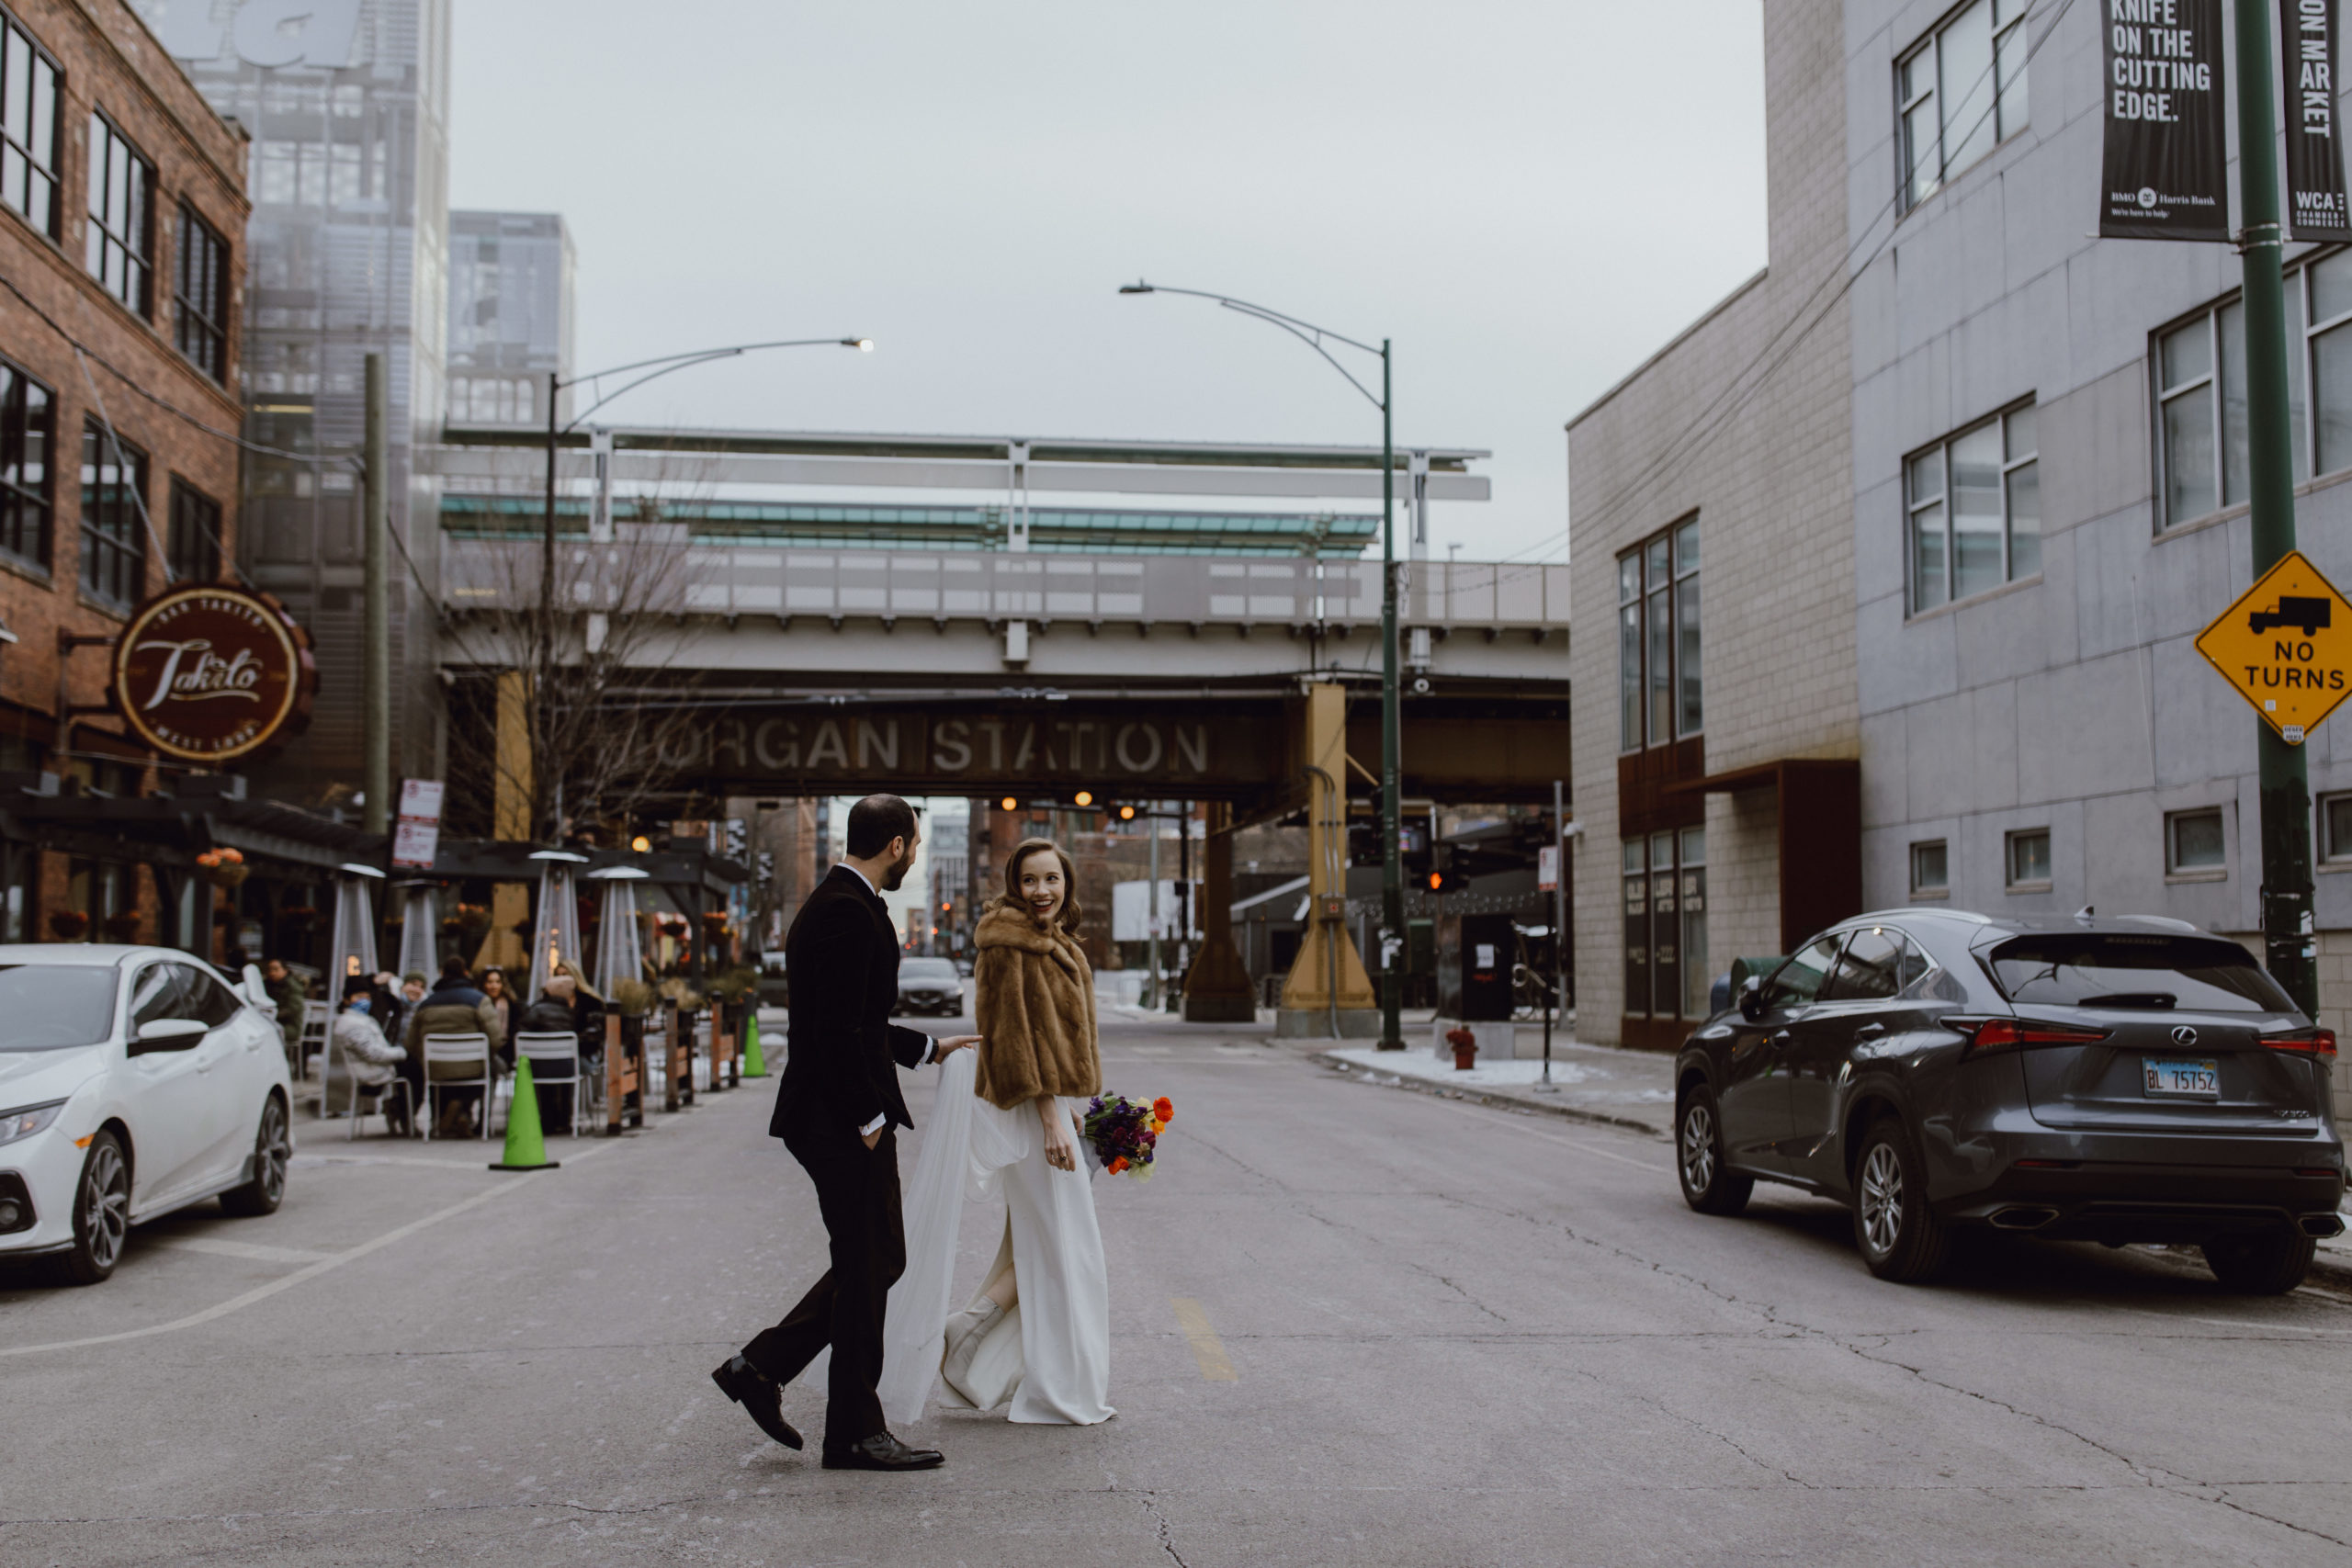 Couple in front of Morgan Station in Chicago.